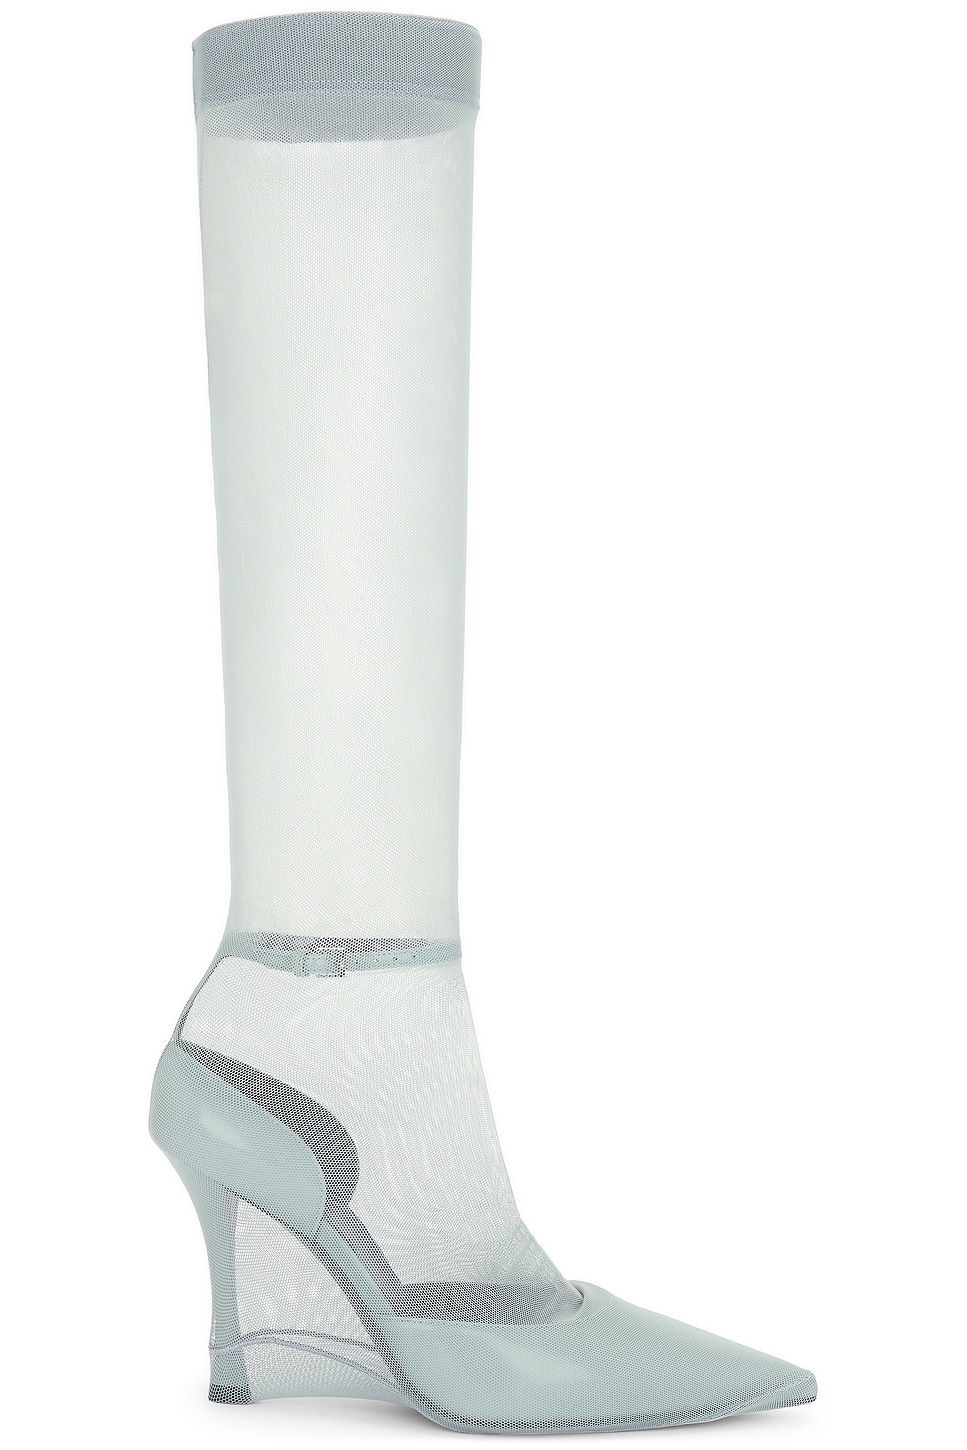 Image 1 of Givenchy Show Stocking Pump in Grey